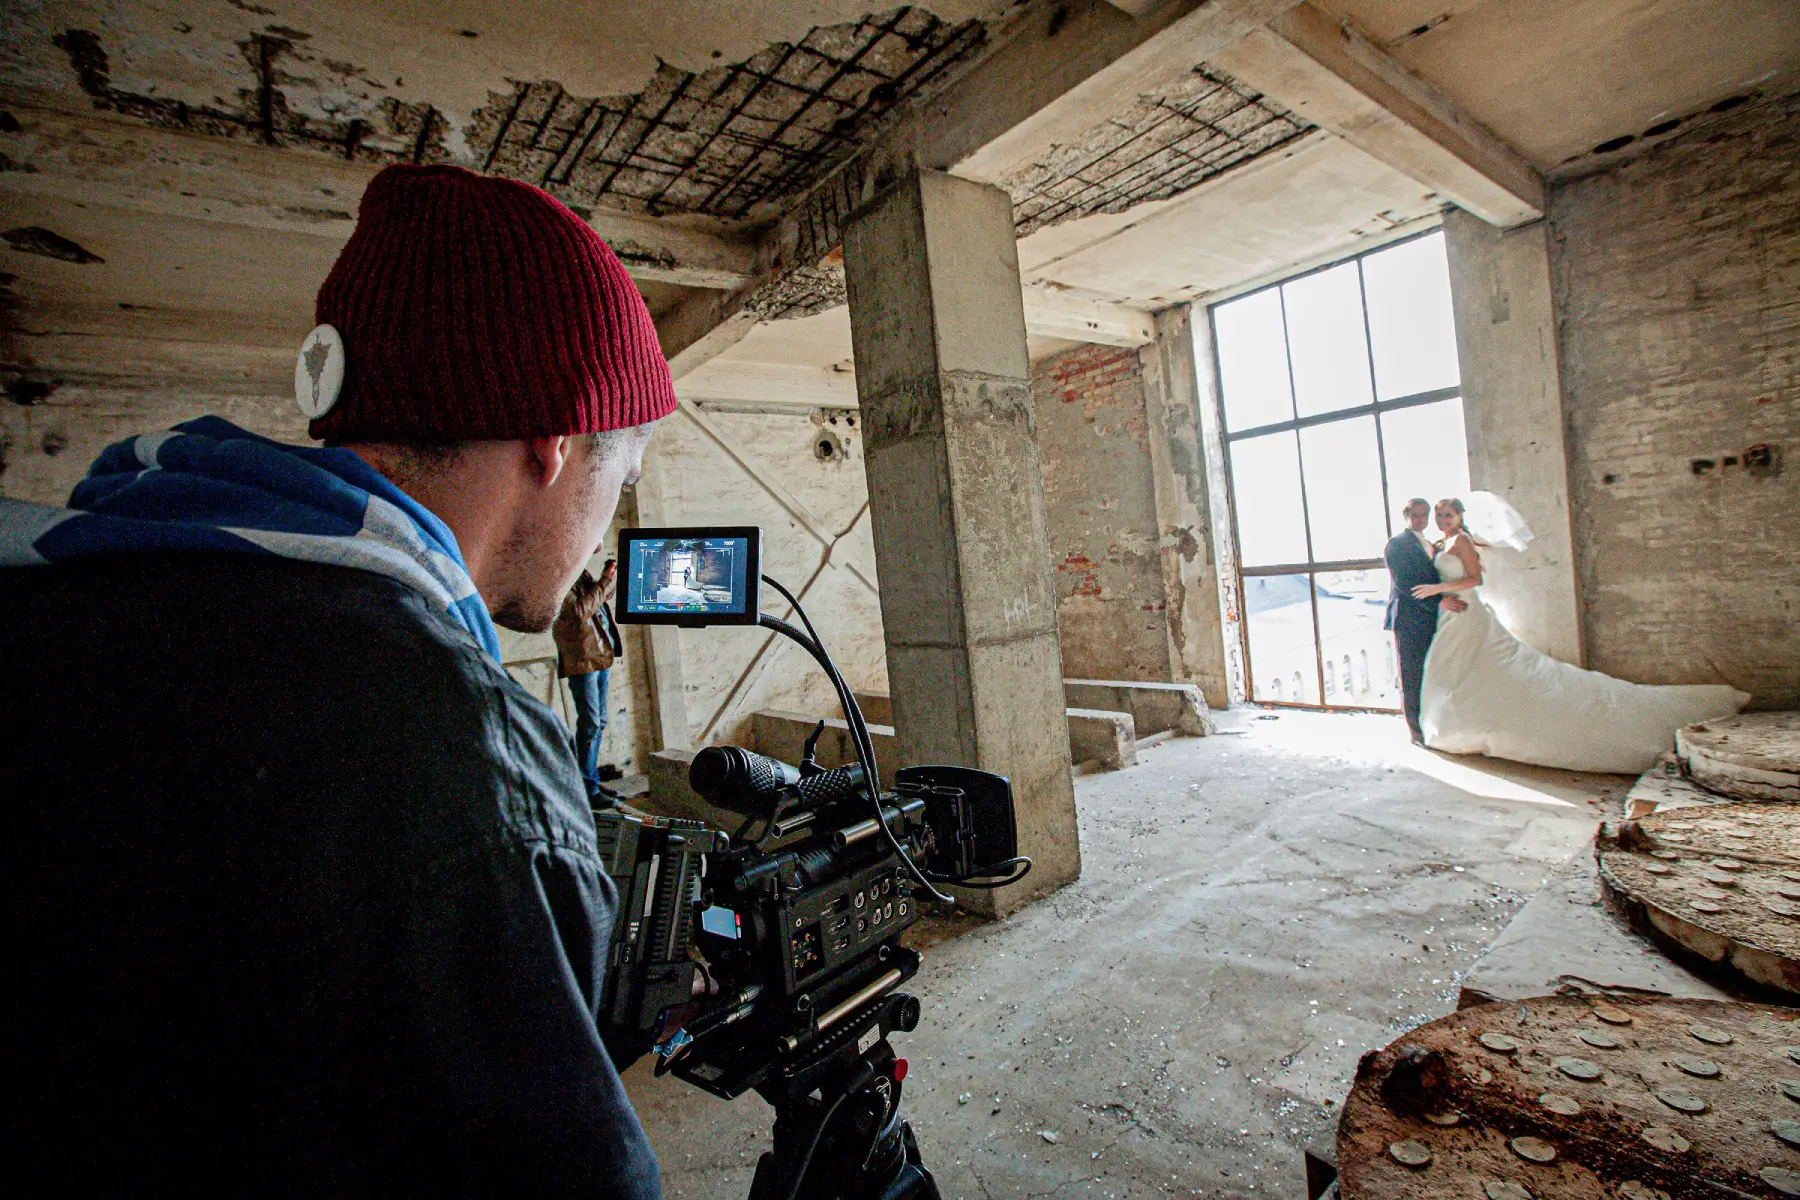 A videographer and photographer doing a wedding shoot in an old building